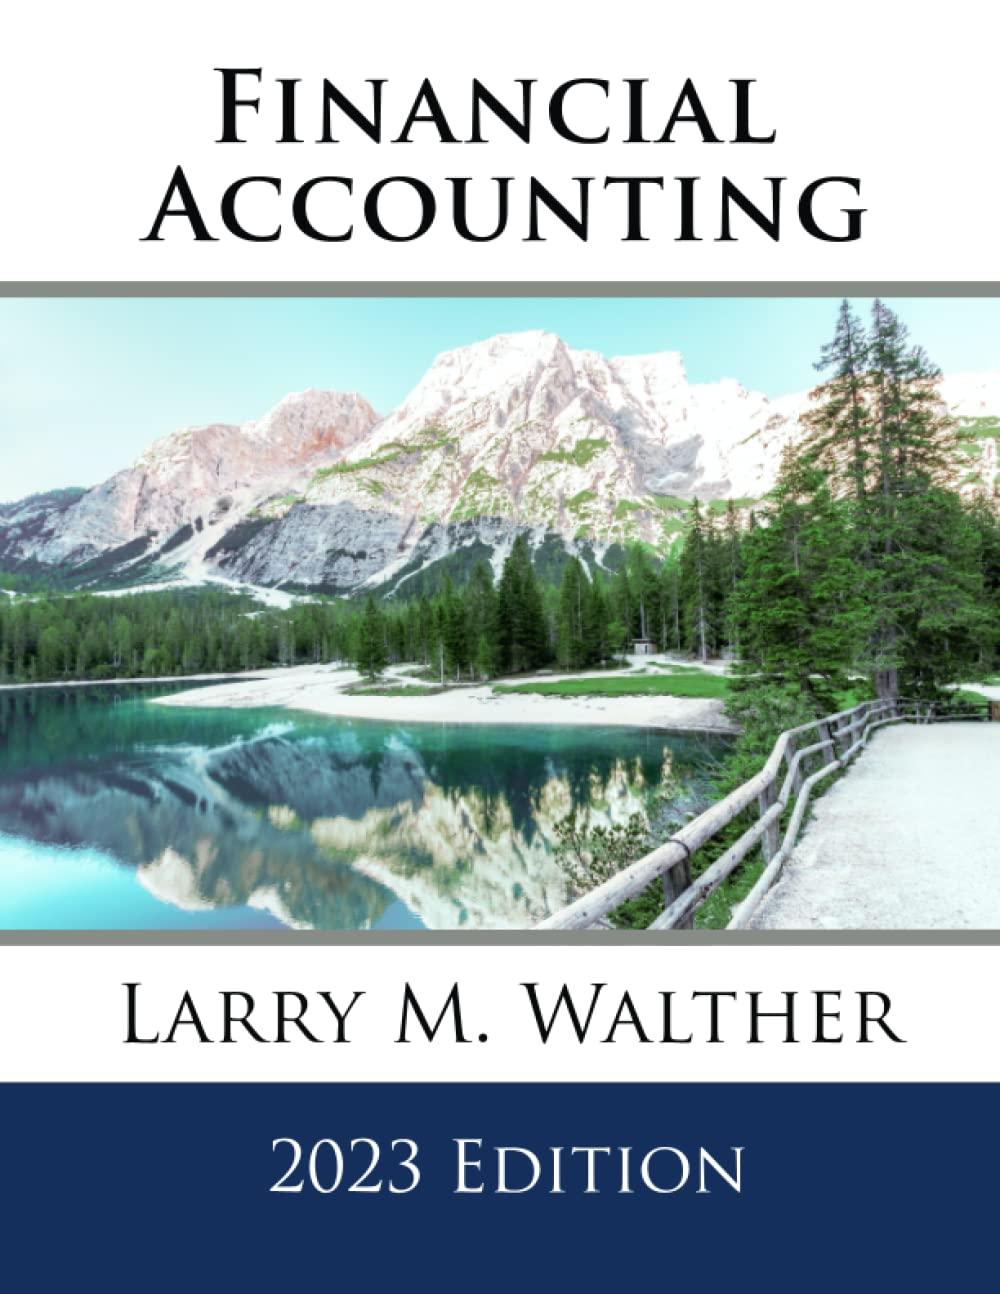 financial accounting 2023th edition larry m. walther 8375021379, 979-8375021379